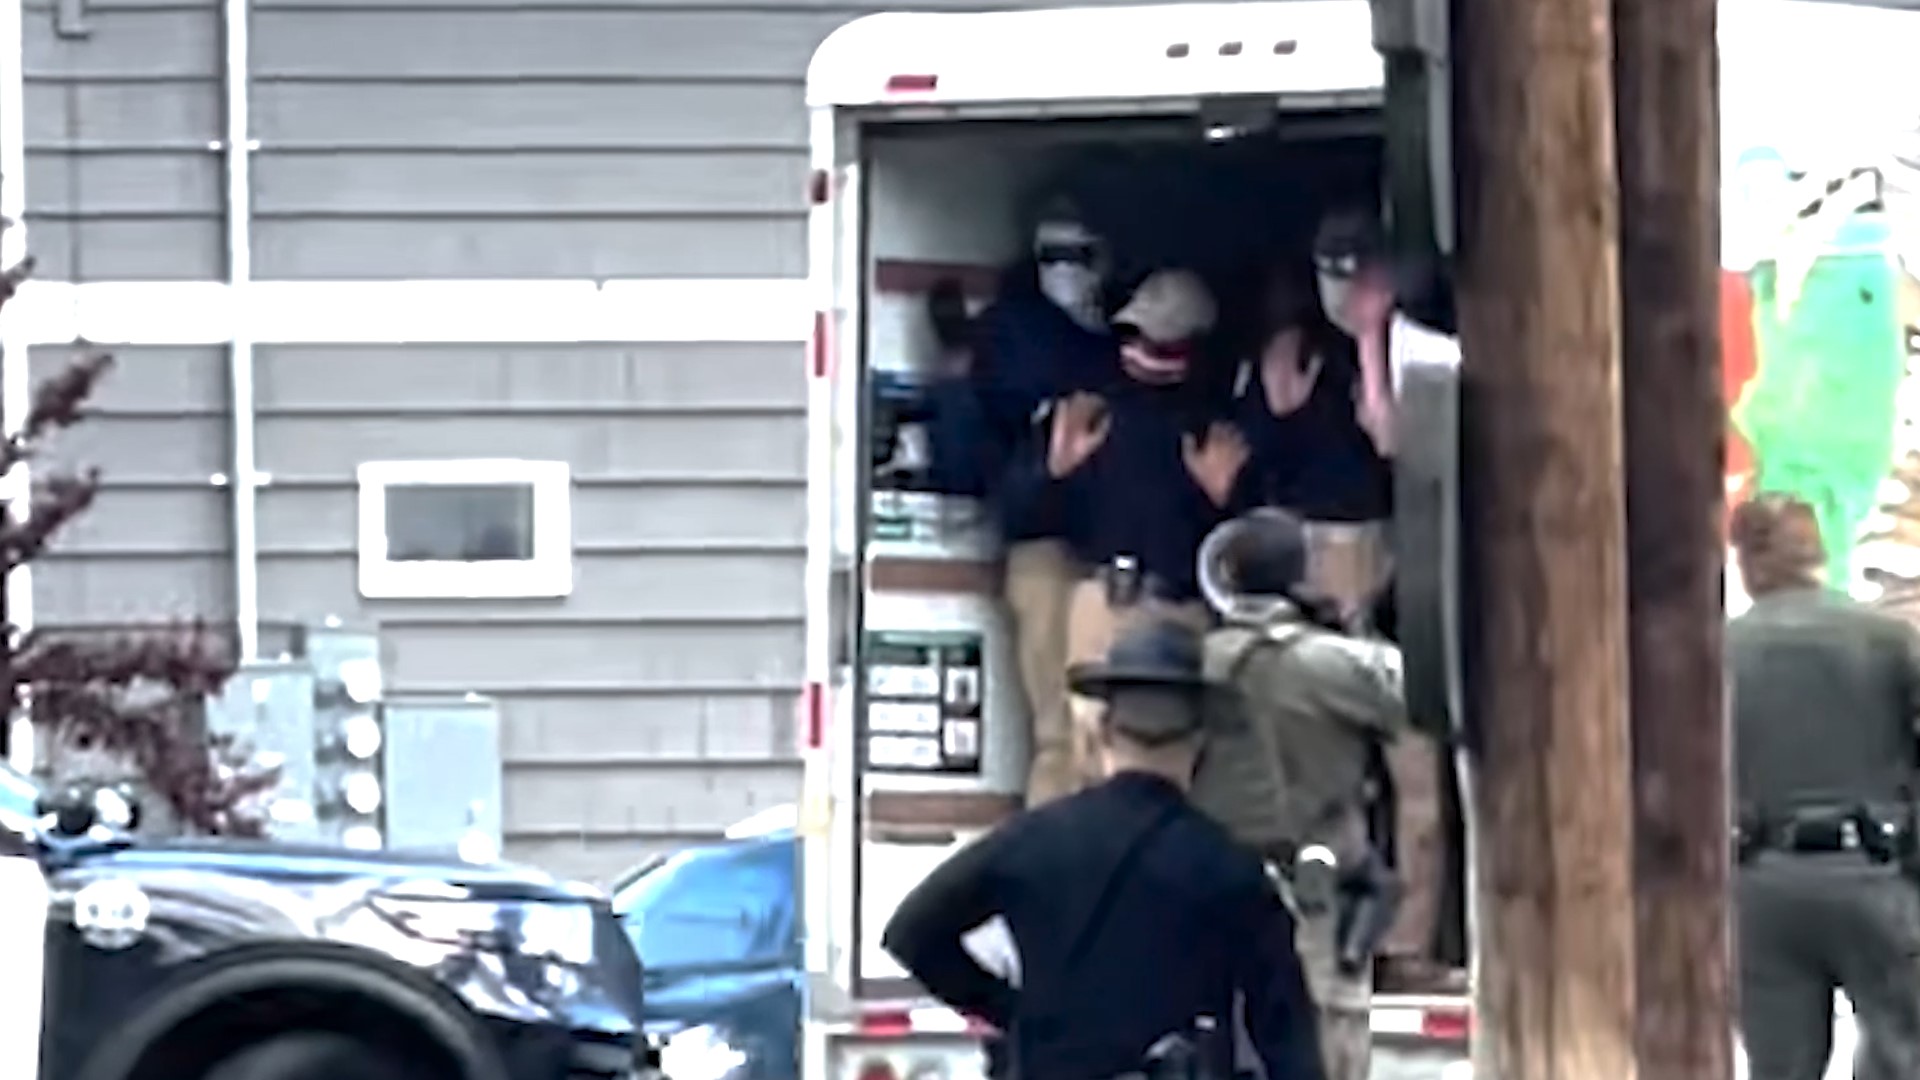 Police stopped a U-haul in Coeur d'Alene on Saturday and detained about 20 people inside who were all dressed the same